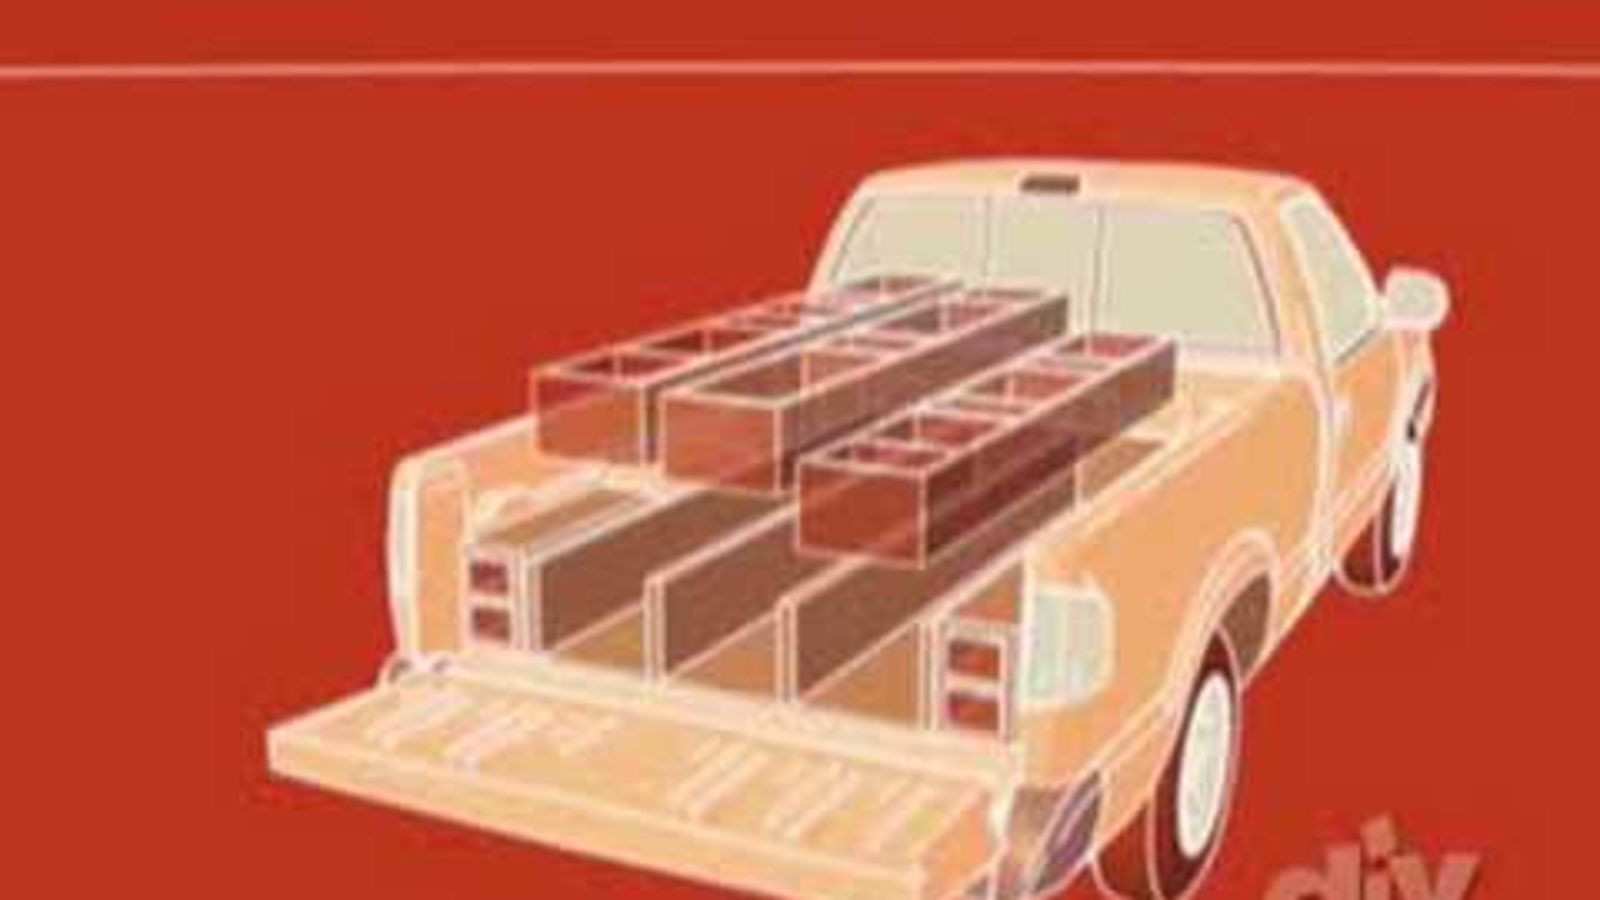 Truck Bed Organizer DIY
 Maximize Your Truck Bed with a DIY Storage System